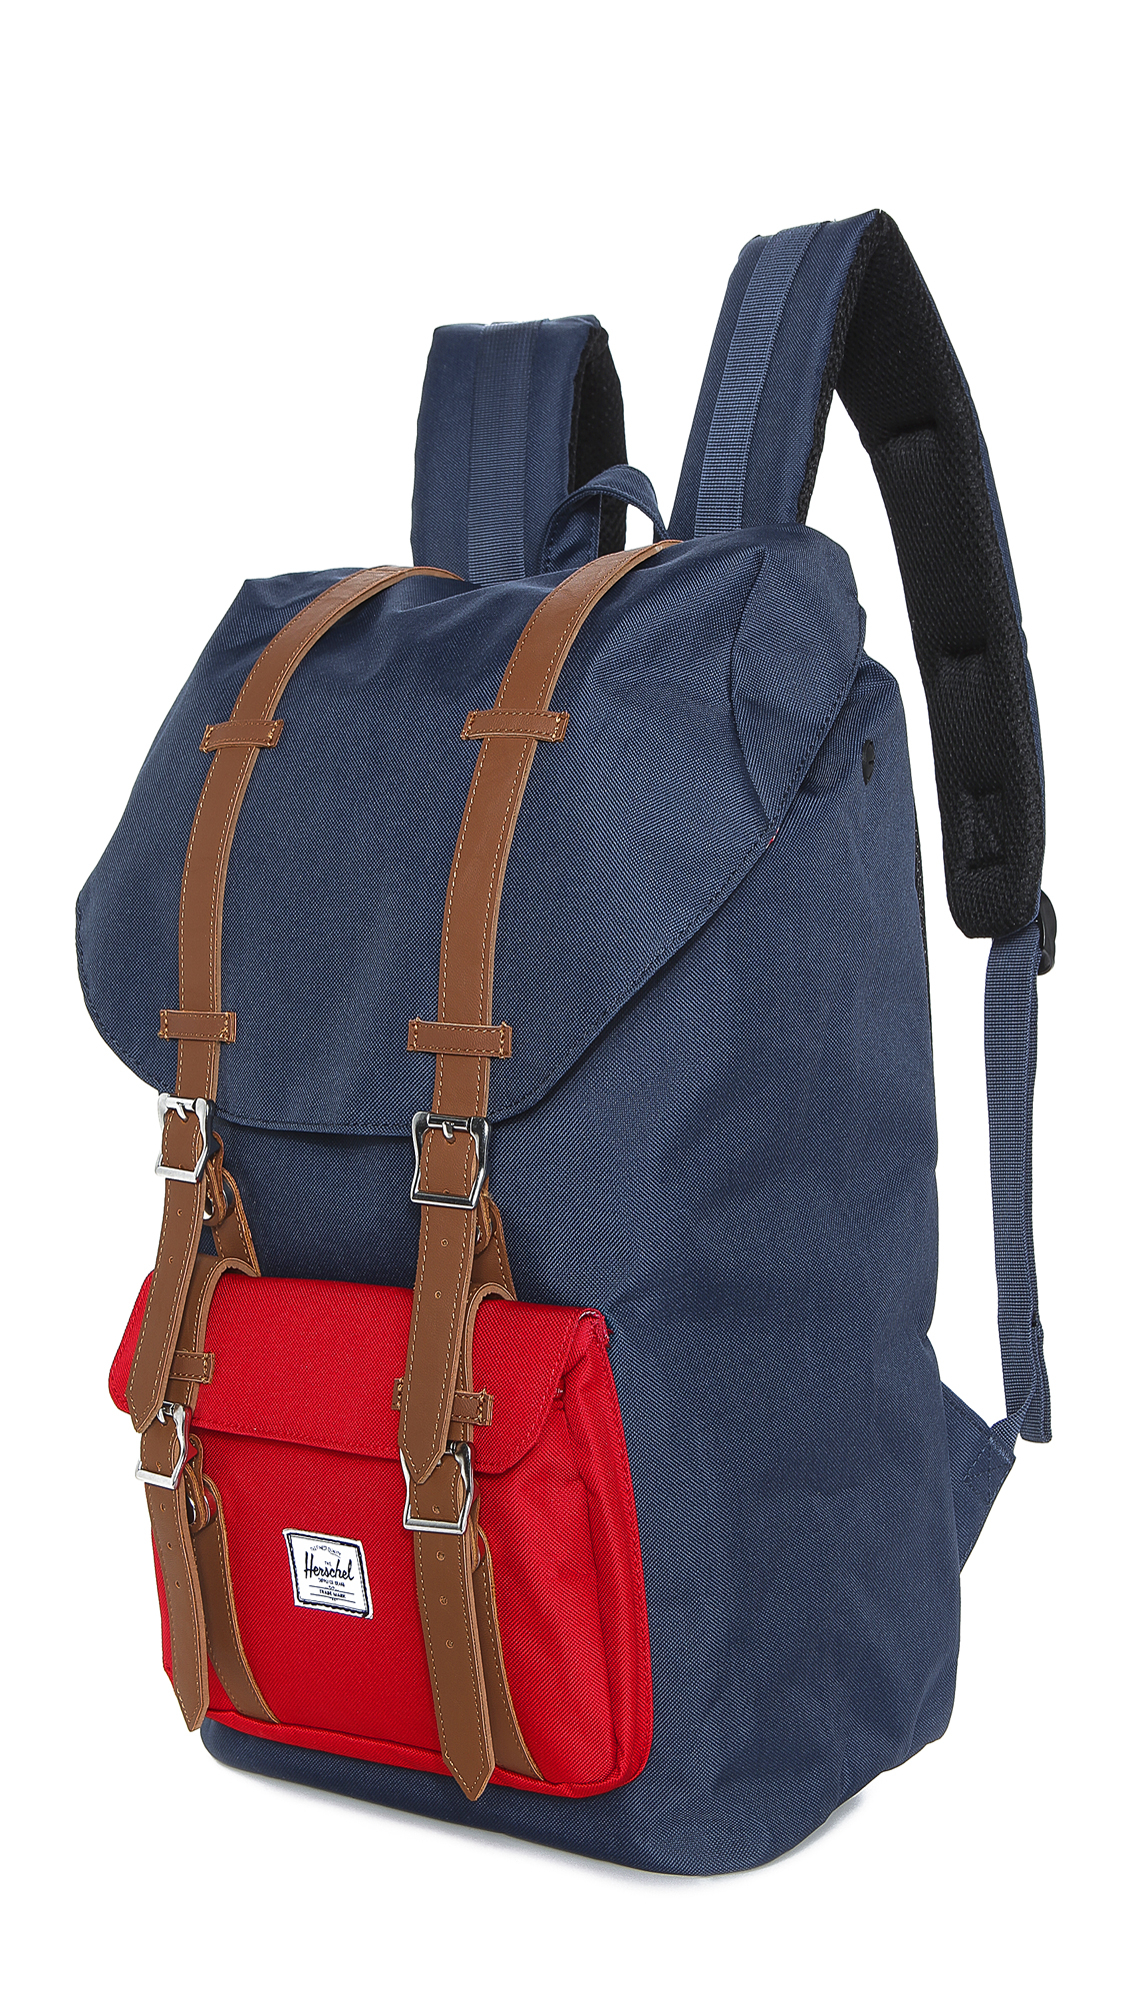 Lyst - Herschel Supply Co. Little America Backpack with Leather Straps in Blue for Men